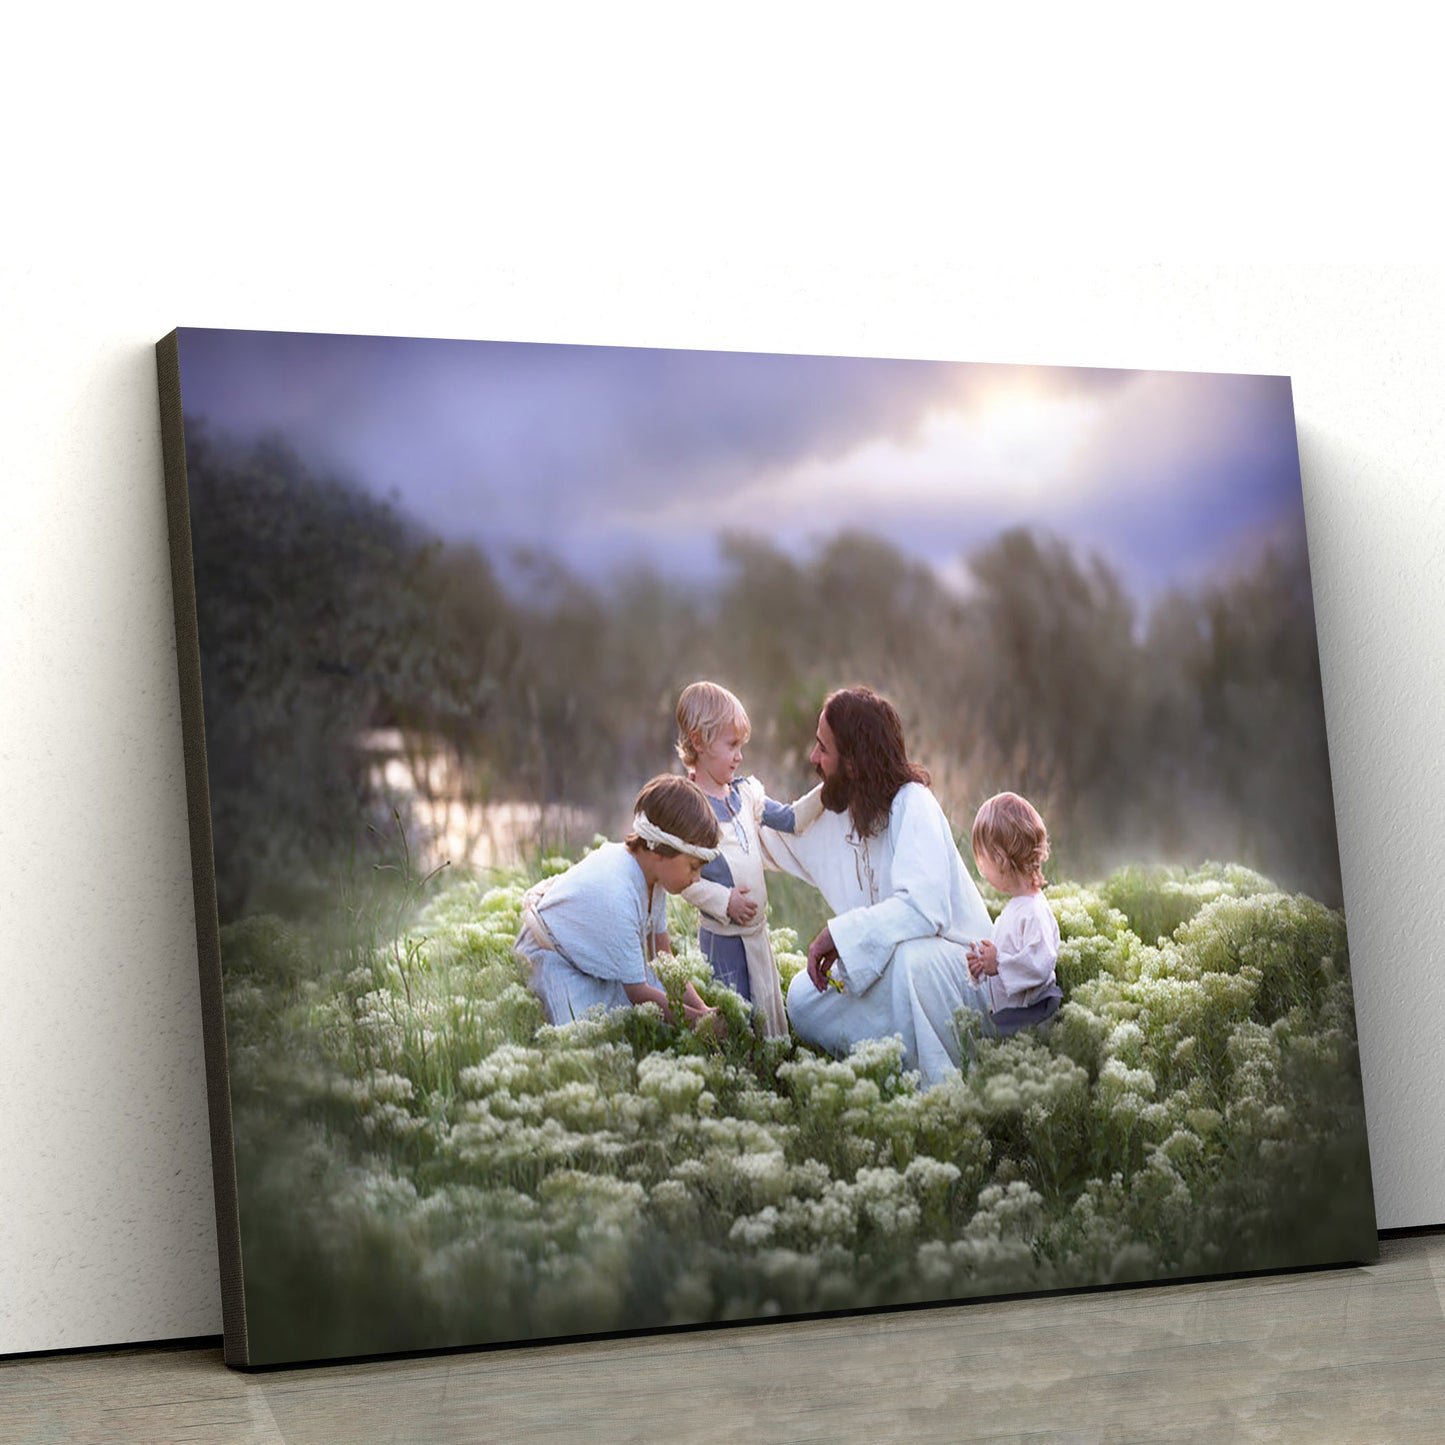 Salt Of The Earth Canvas Picture - Jesus Canvas Wall Art - Christian Wall Art